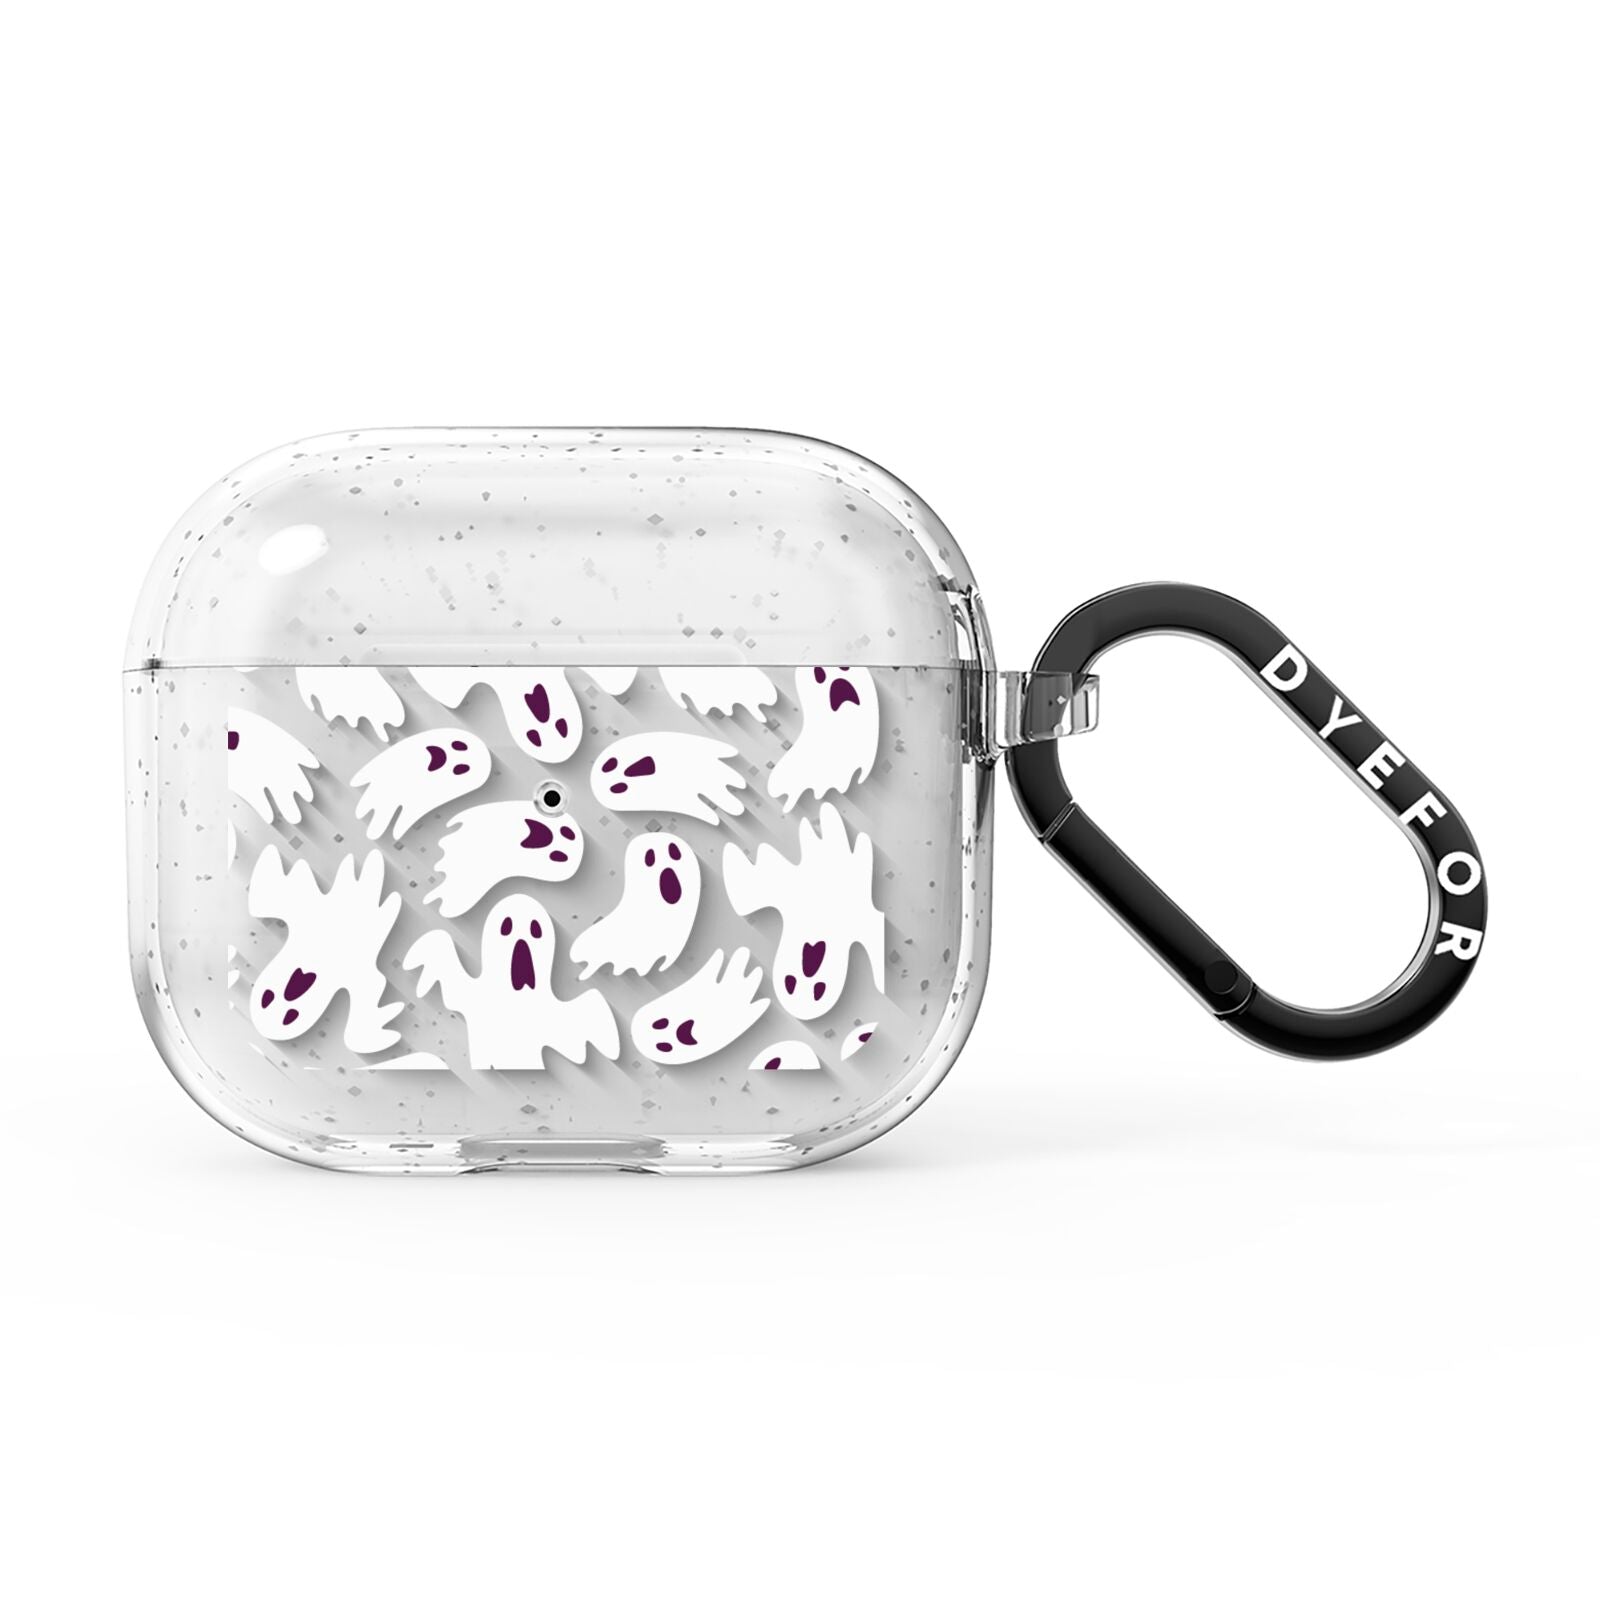 Crowd of Ghosts with Transparent Background AirPods Glitter Case 3rd Gen